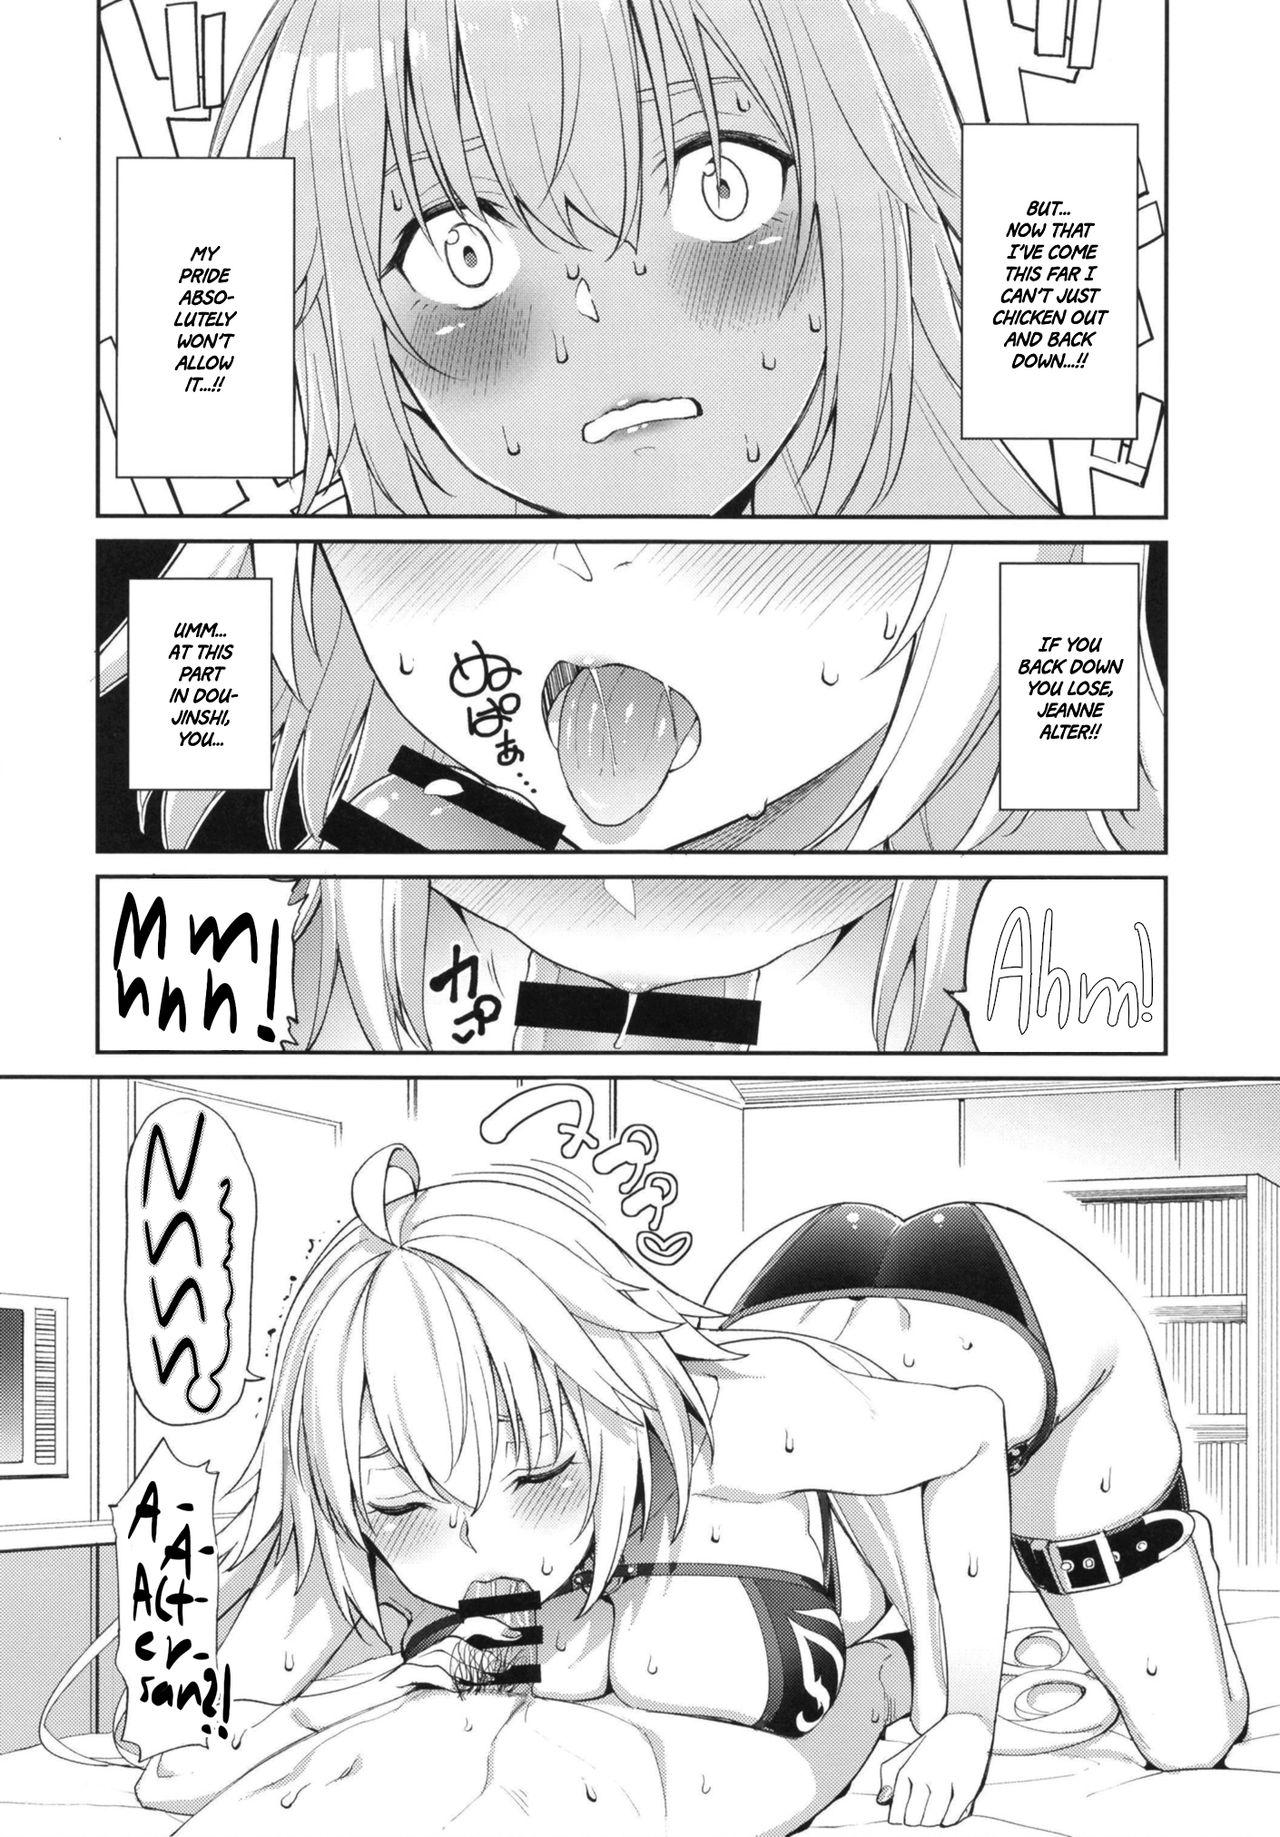 Hermosa Jeanne no Shitto | Jeanne's Jealousy - Fate grand order Jerkoff - Page 8